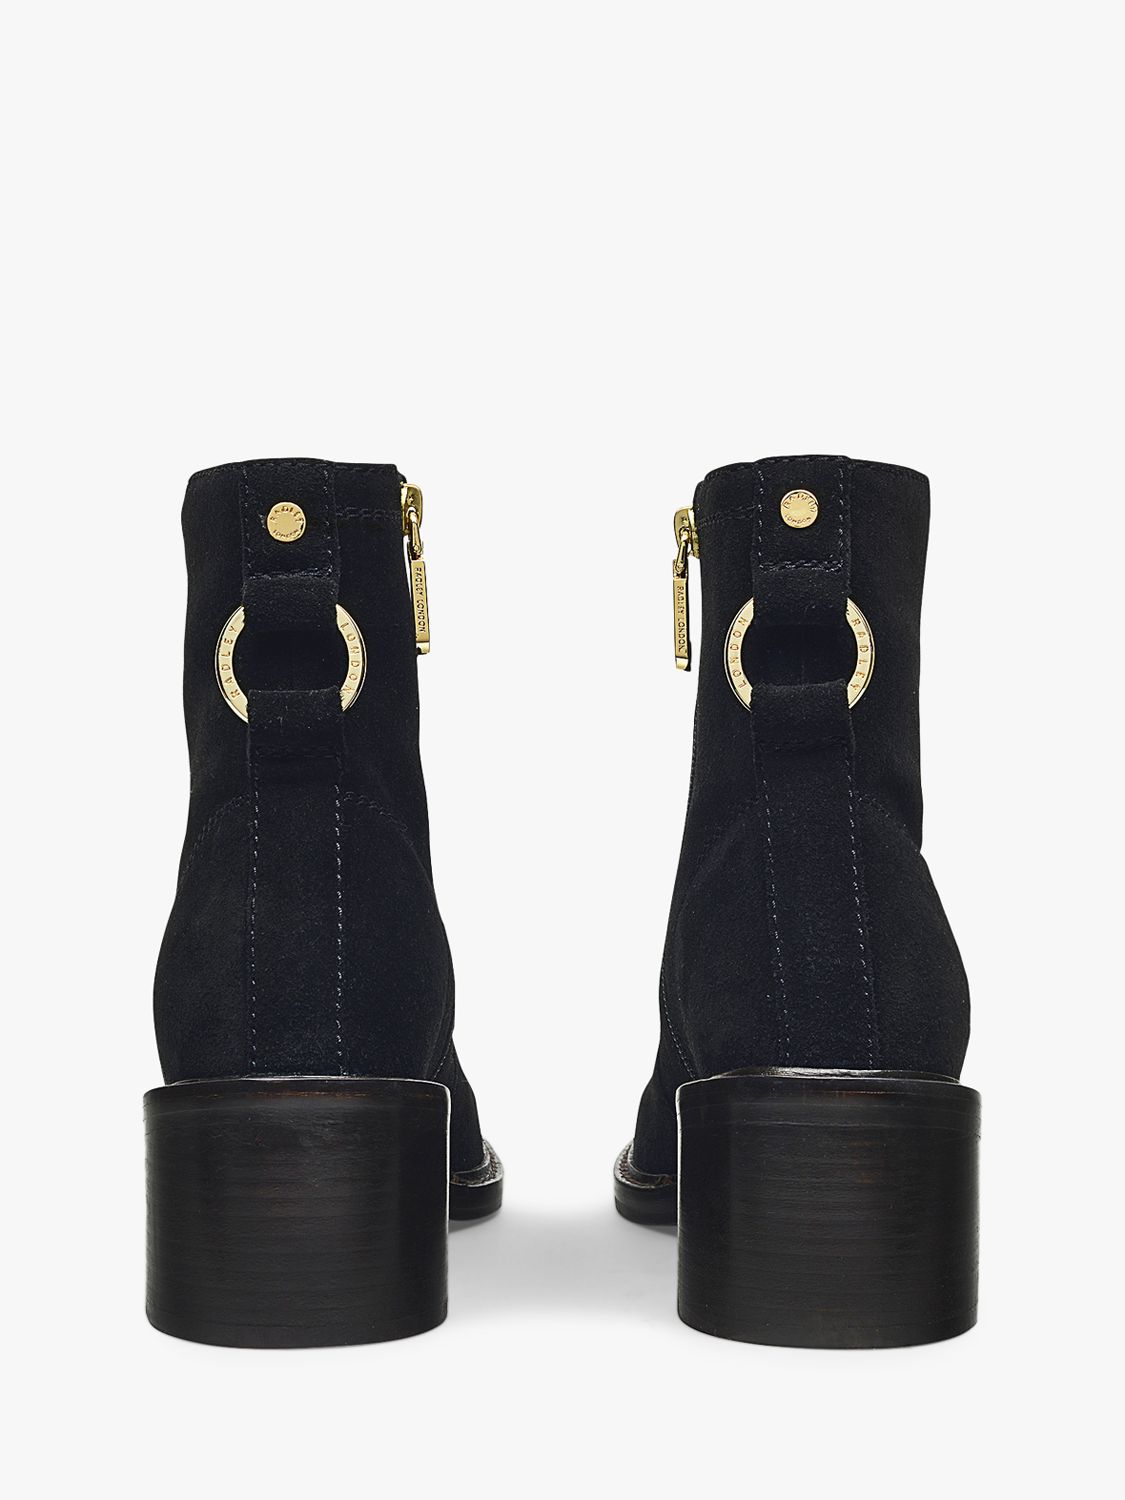 Radley New Street Suede Ankle Boots, Black at John Lewis & Partners